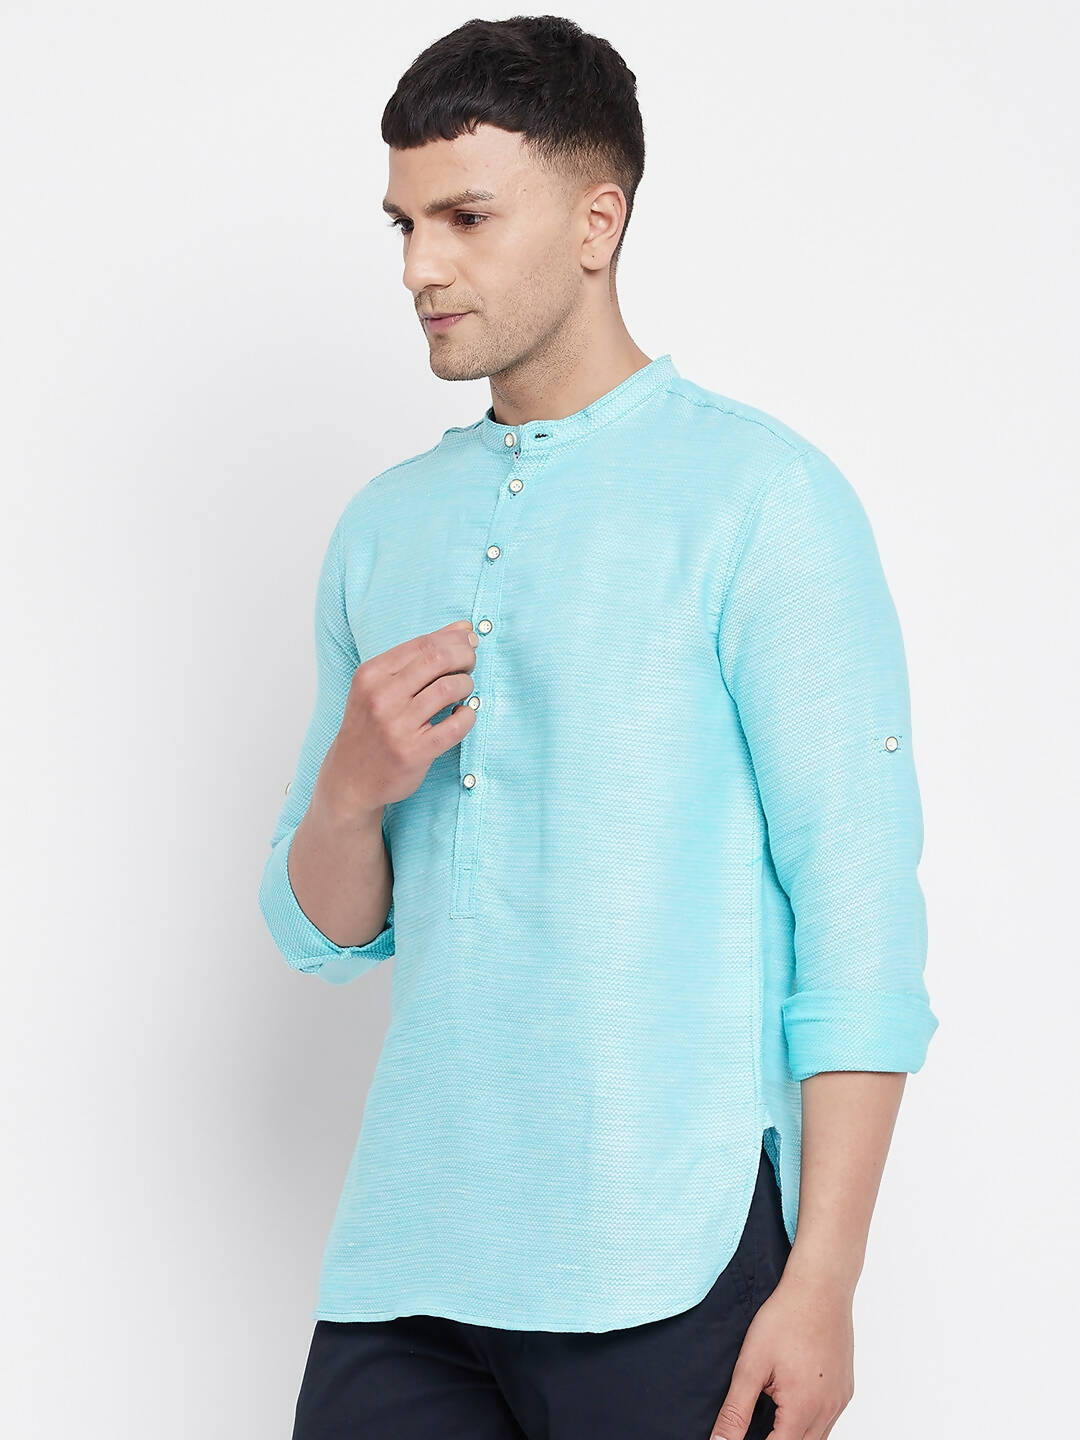 Even Apparels Pure Cotton Men's Kurta in Blue Color With Band Collar - Distacart